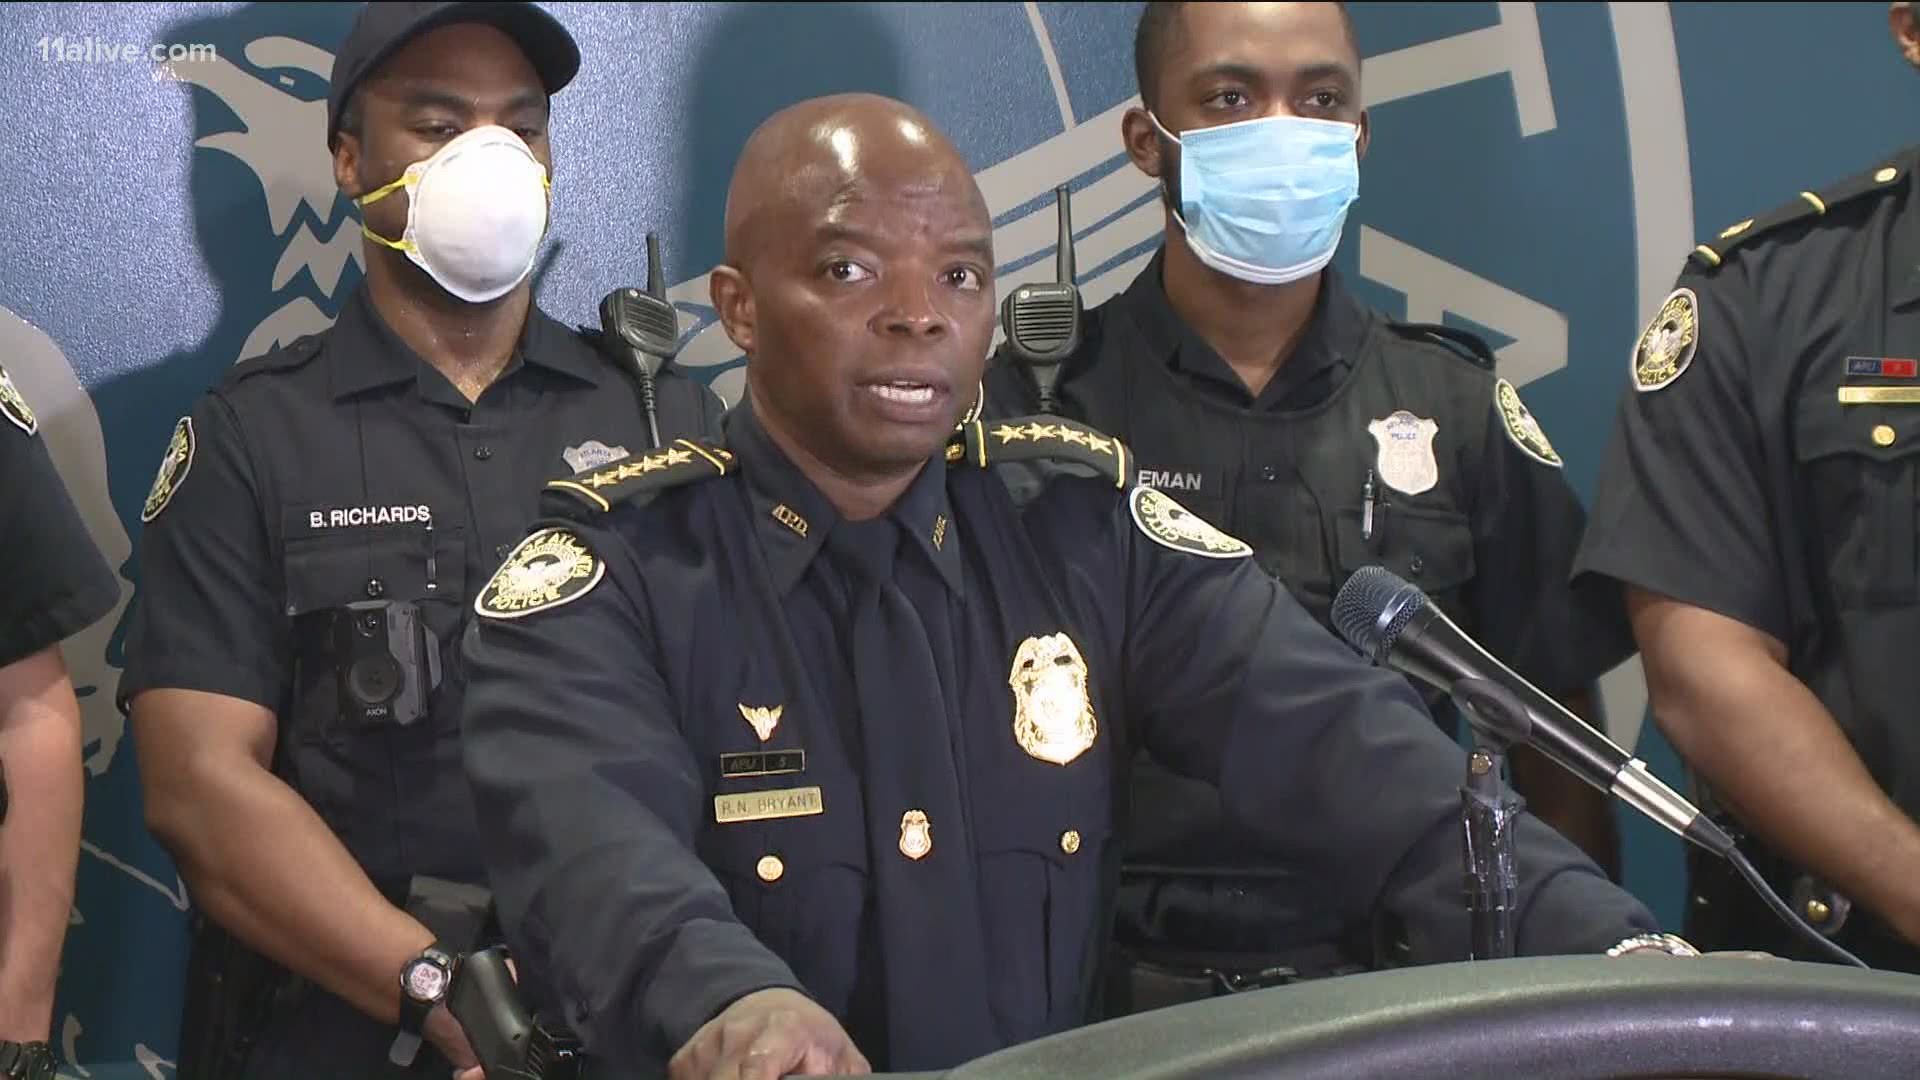 Interim Atlanta Police Chief Rodney Bryant had words of reassurance when he spoke to the media on Saturday. But he also issued a warning.